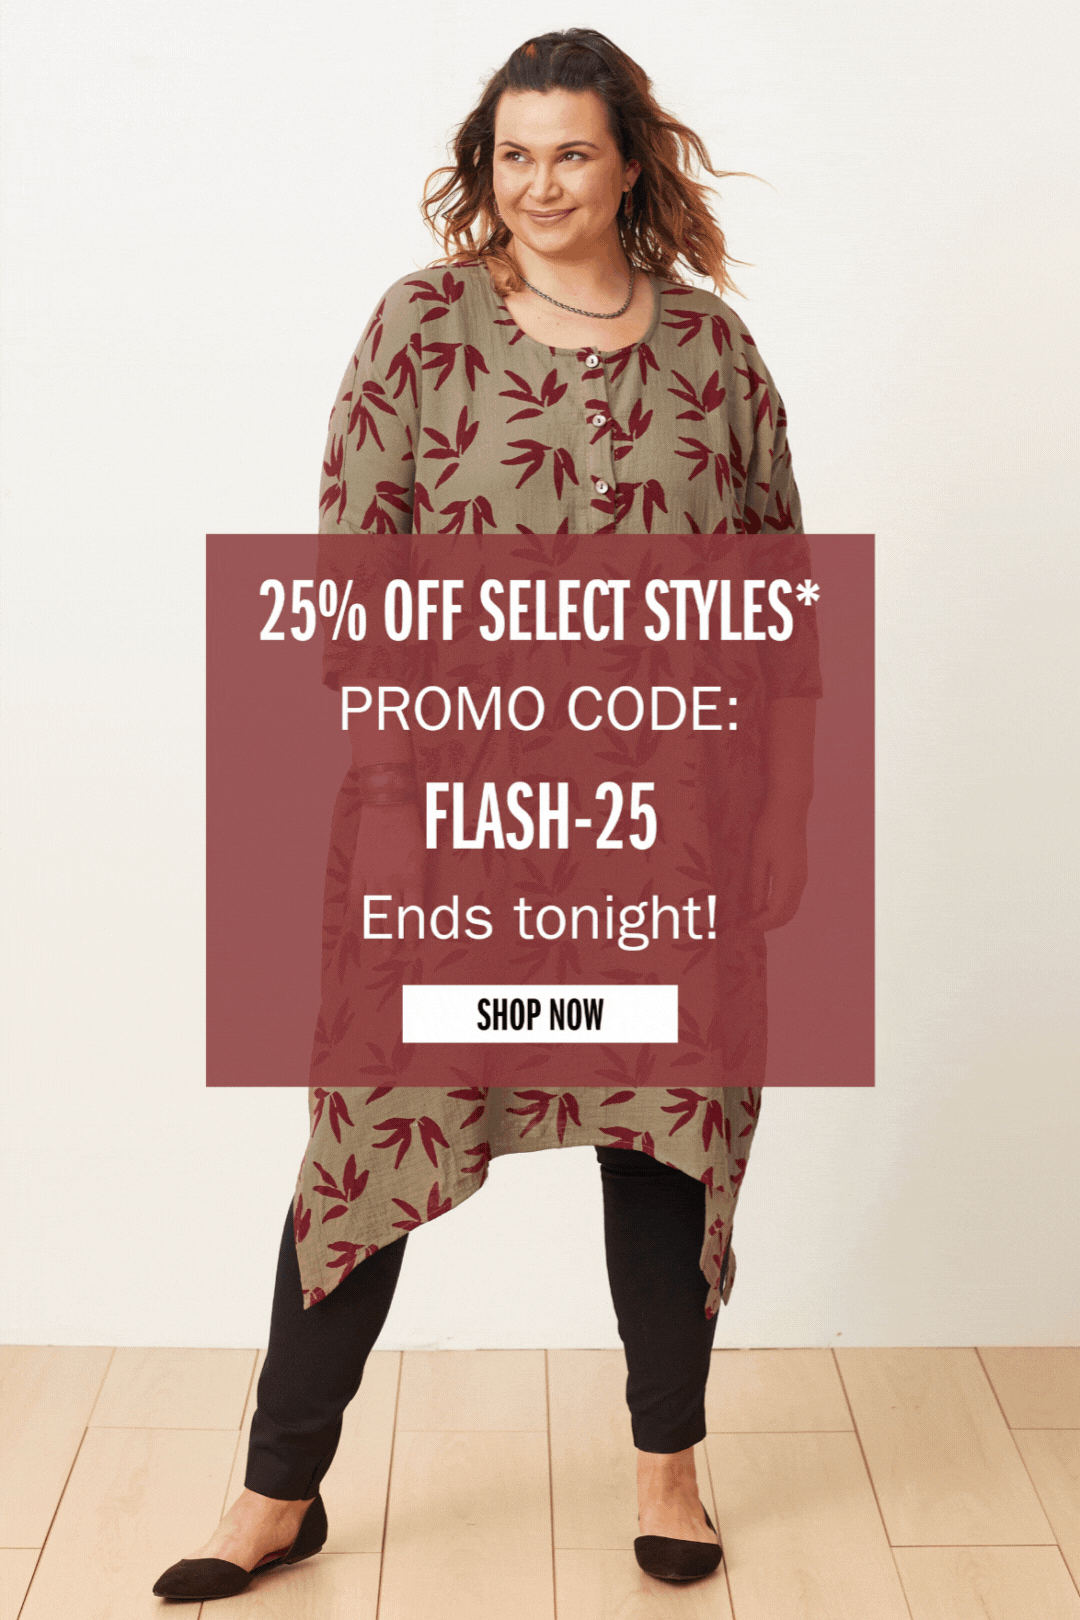 25% OFF SELECT STYLES* PROMO CODE: FLASH-25 Ends tonight! SHOP NOW